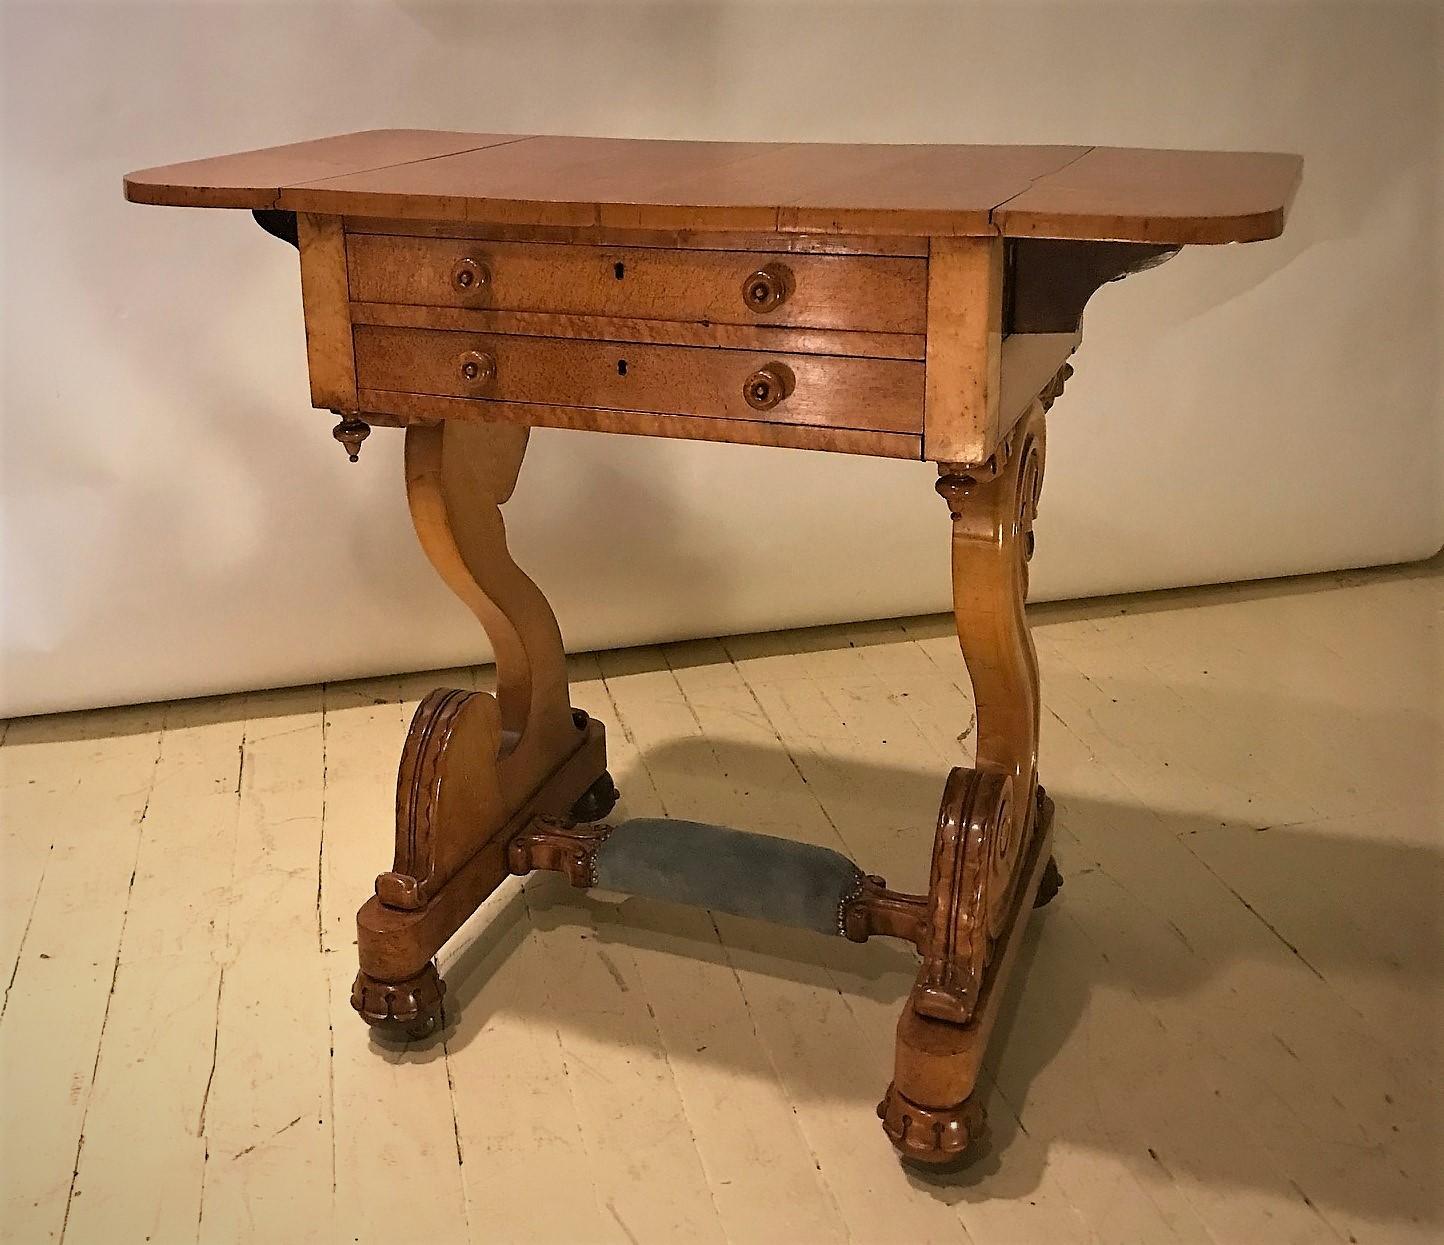 This beautiful Empire drop-leaf 2-drawer stand is a real show-stopper! Made in Brussels, Belgium in the early 19th Century of highly-figured birdseye maple. Originally it had a sewing basket that has been replaced with a slide-out leather writing